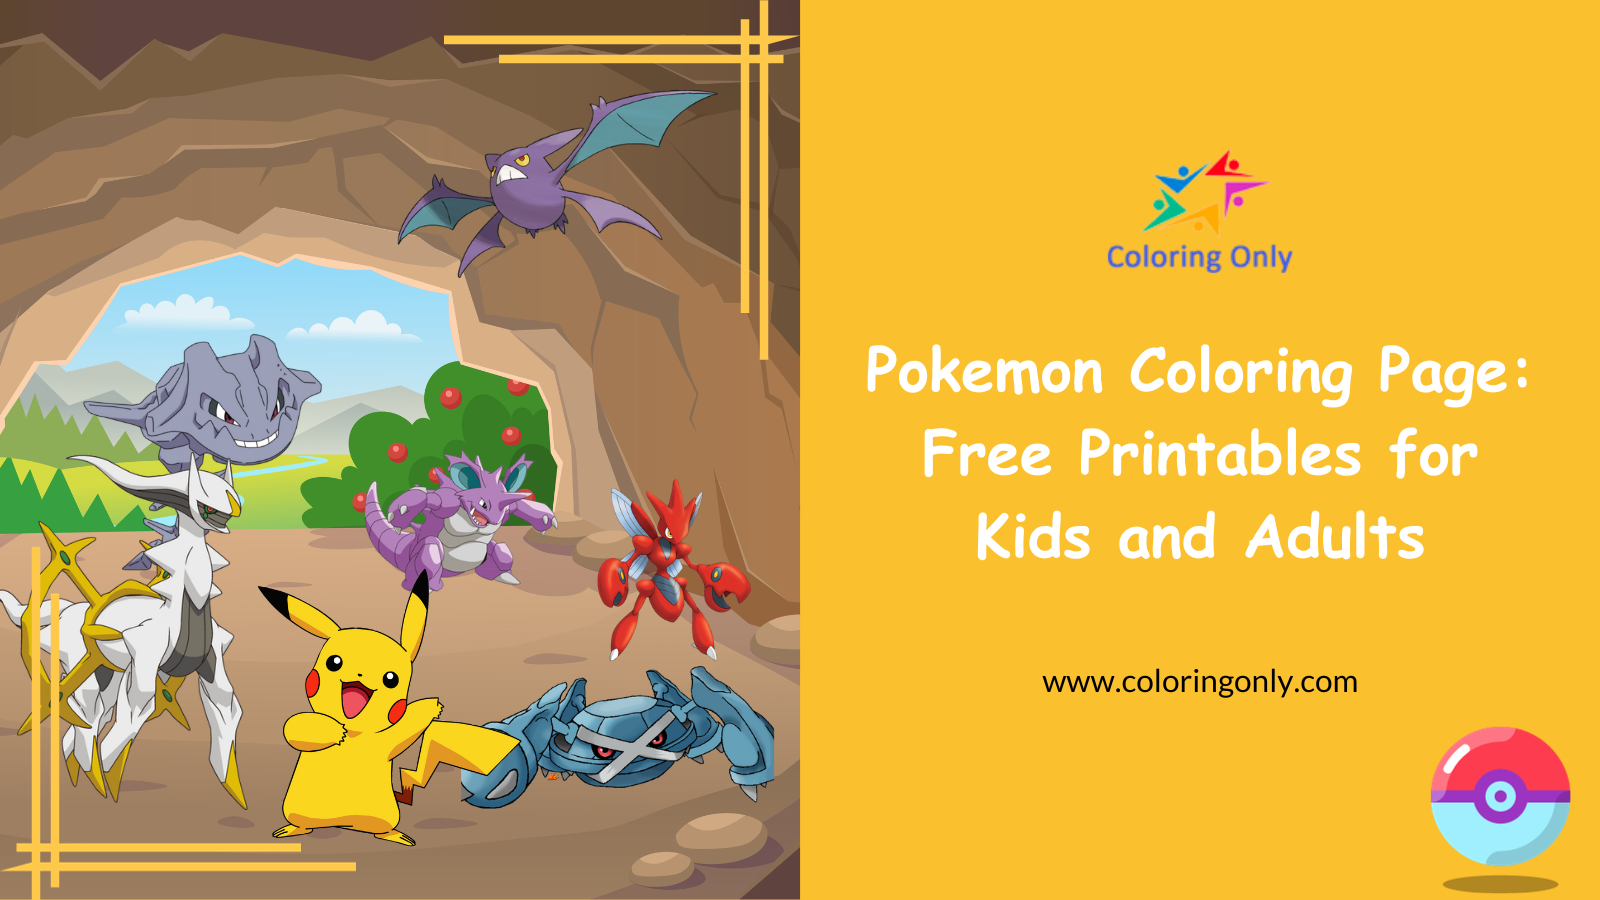 Pokemon Coloring Page: Free Printables for Kids and Adults